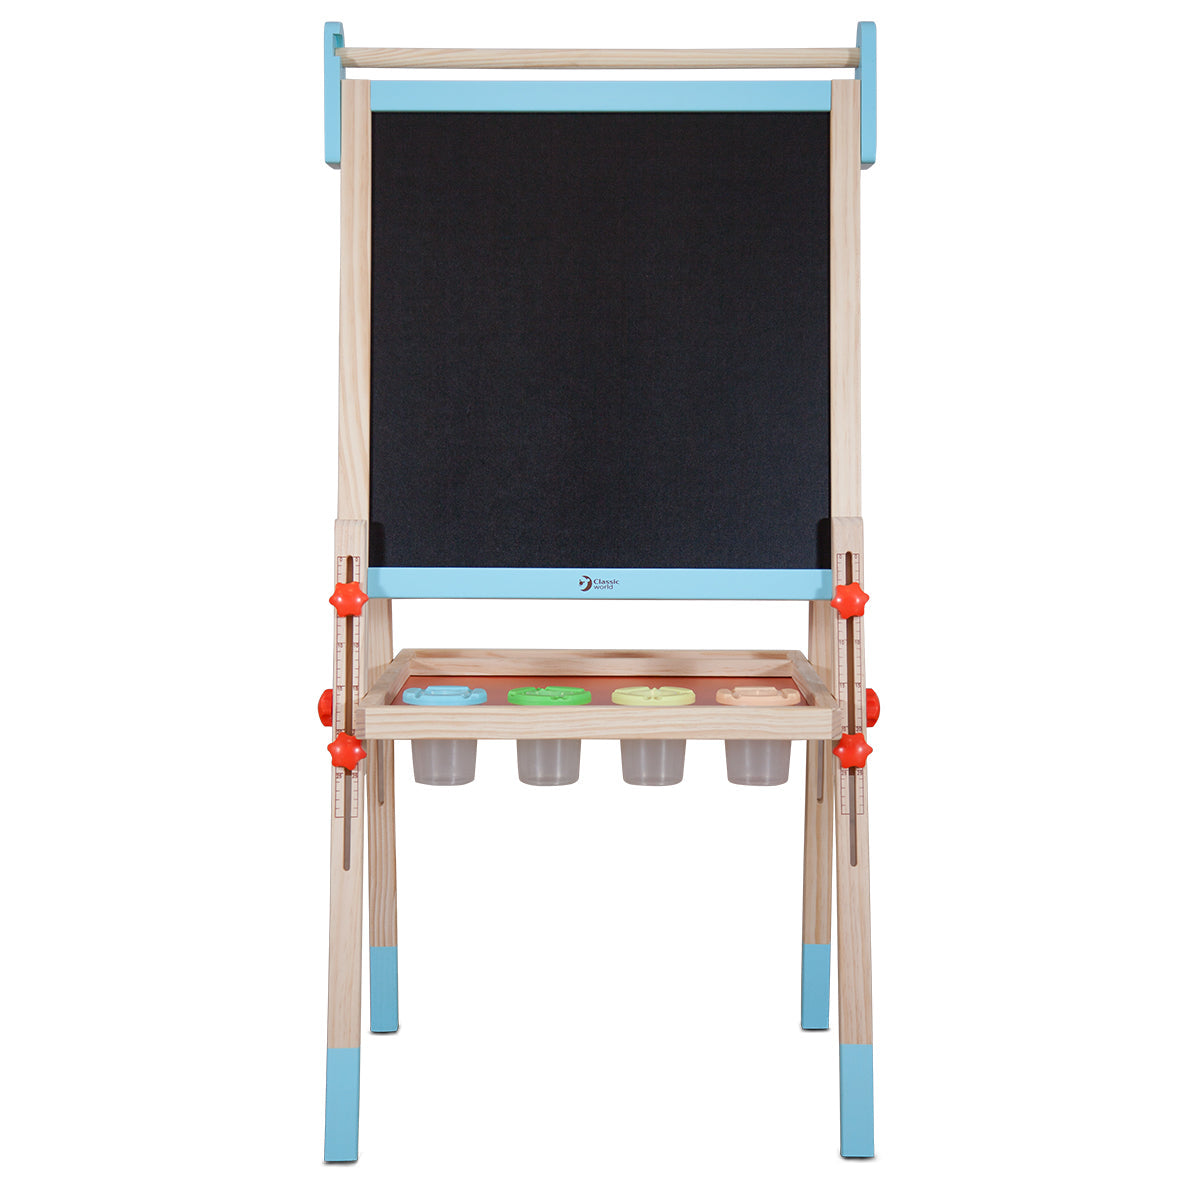 Classic World Multi-Functional Easel